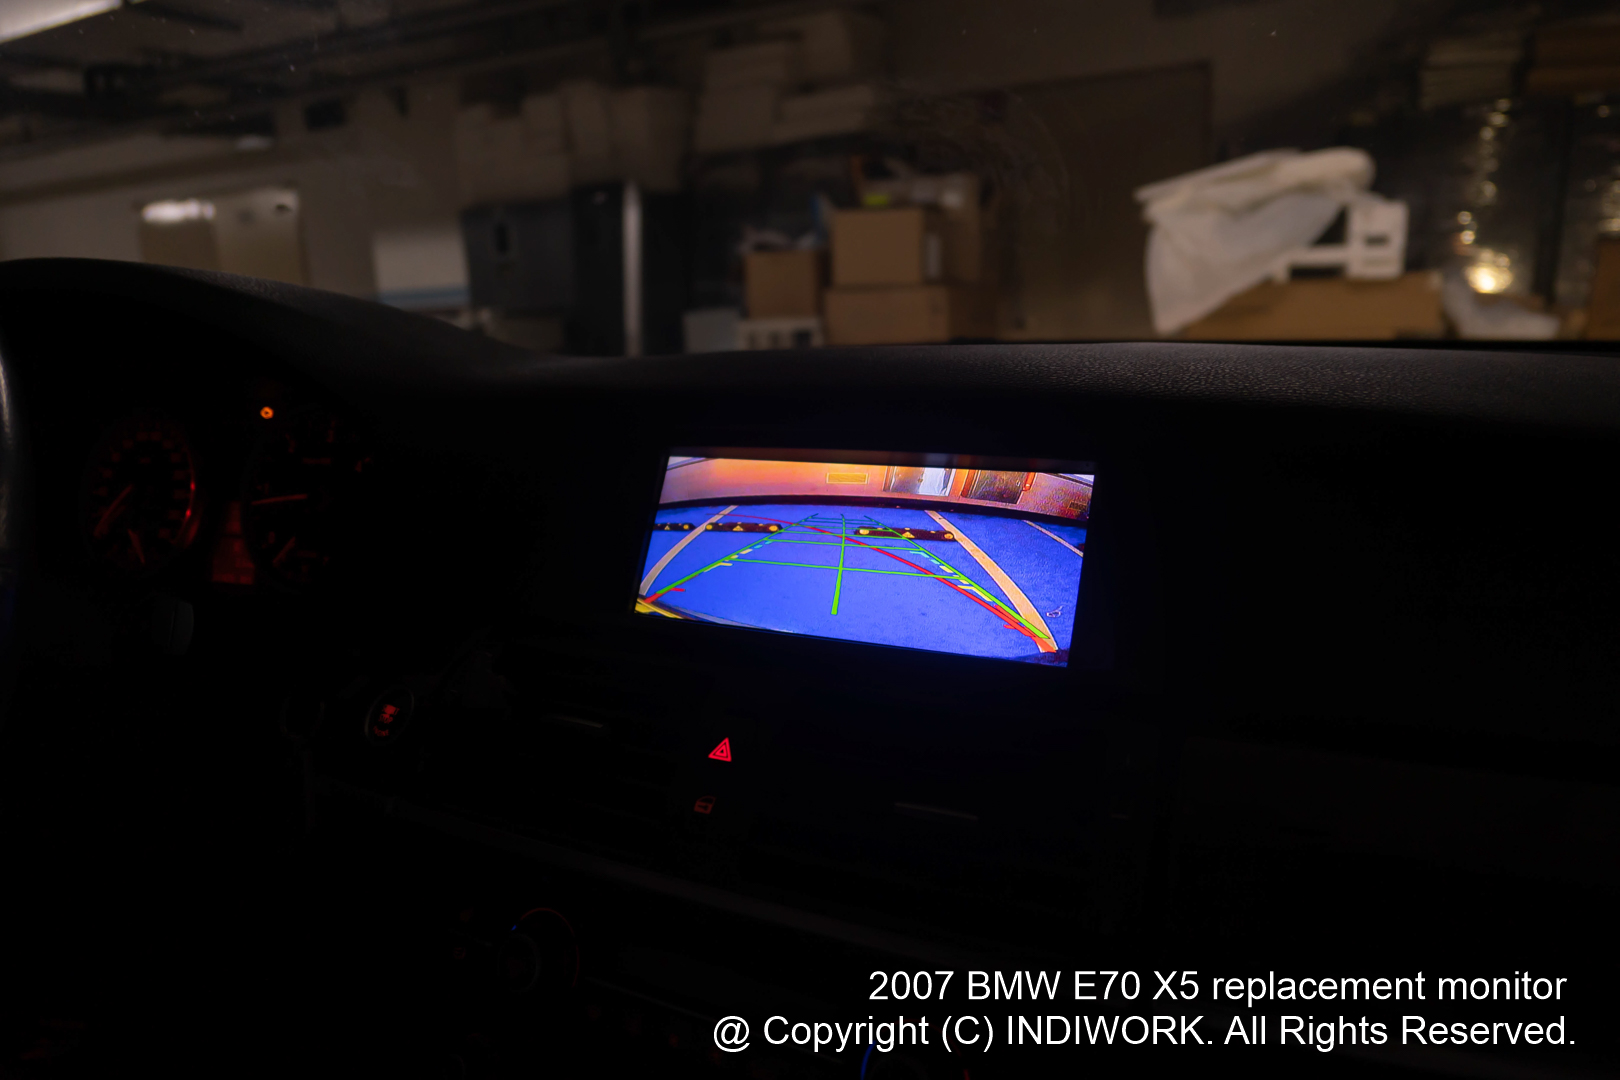 2007 BMW E70 X5 replacement monitor "N-LINK II V4"